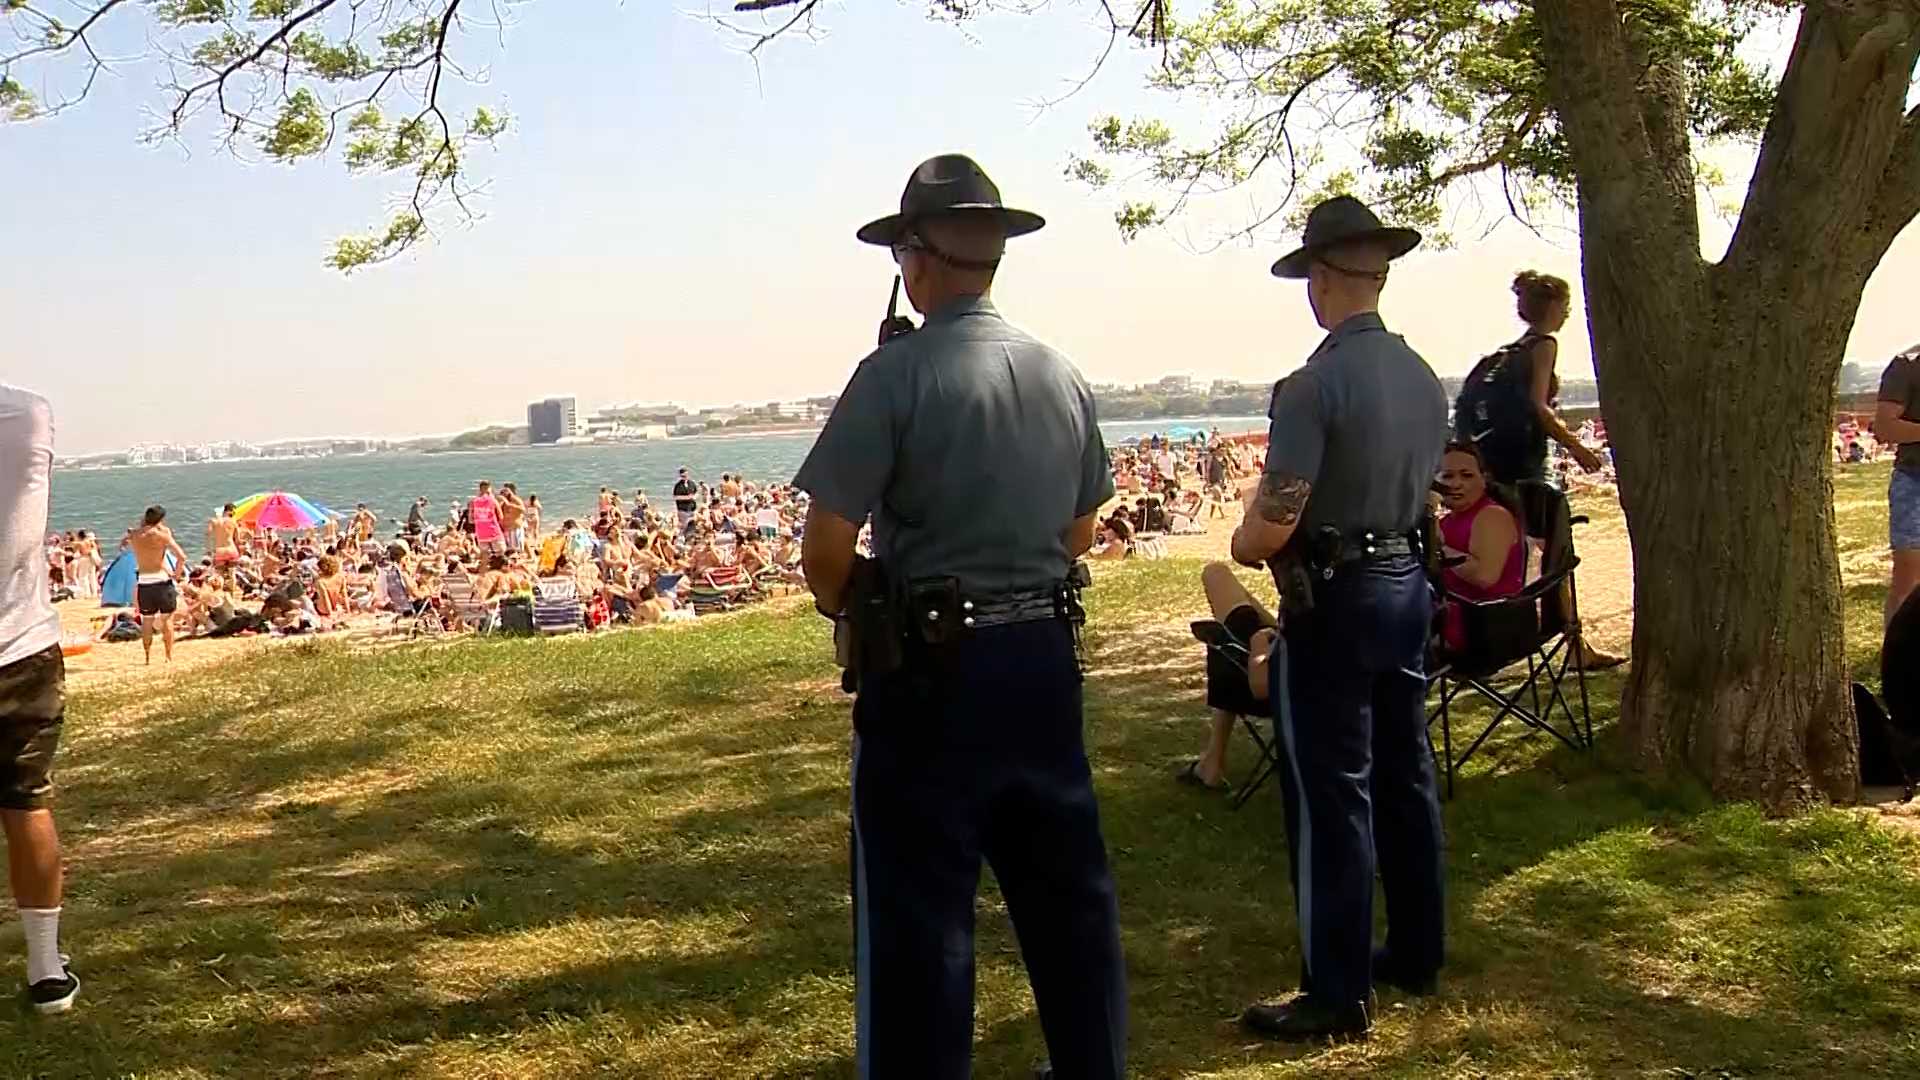 State police continue to step up patrols at popular Greater Boston beaches